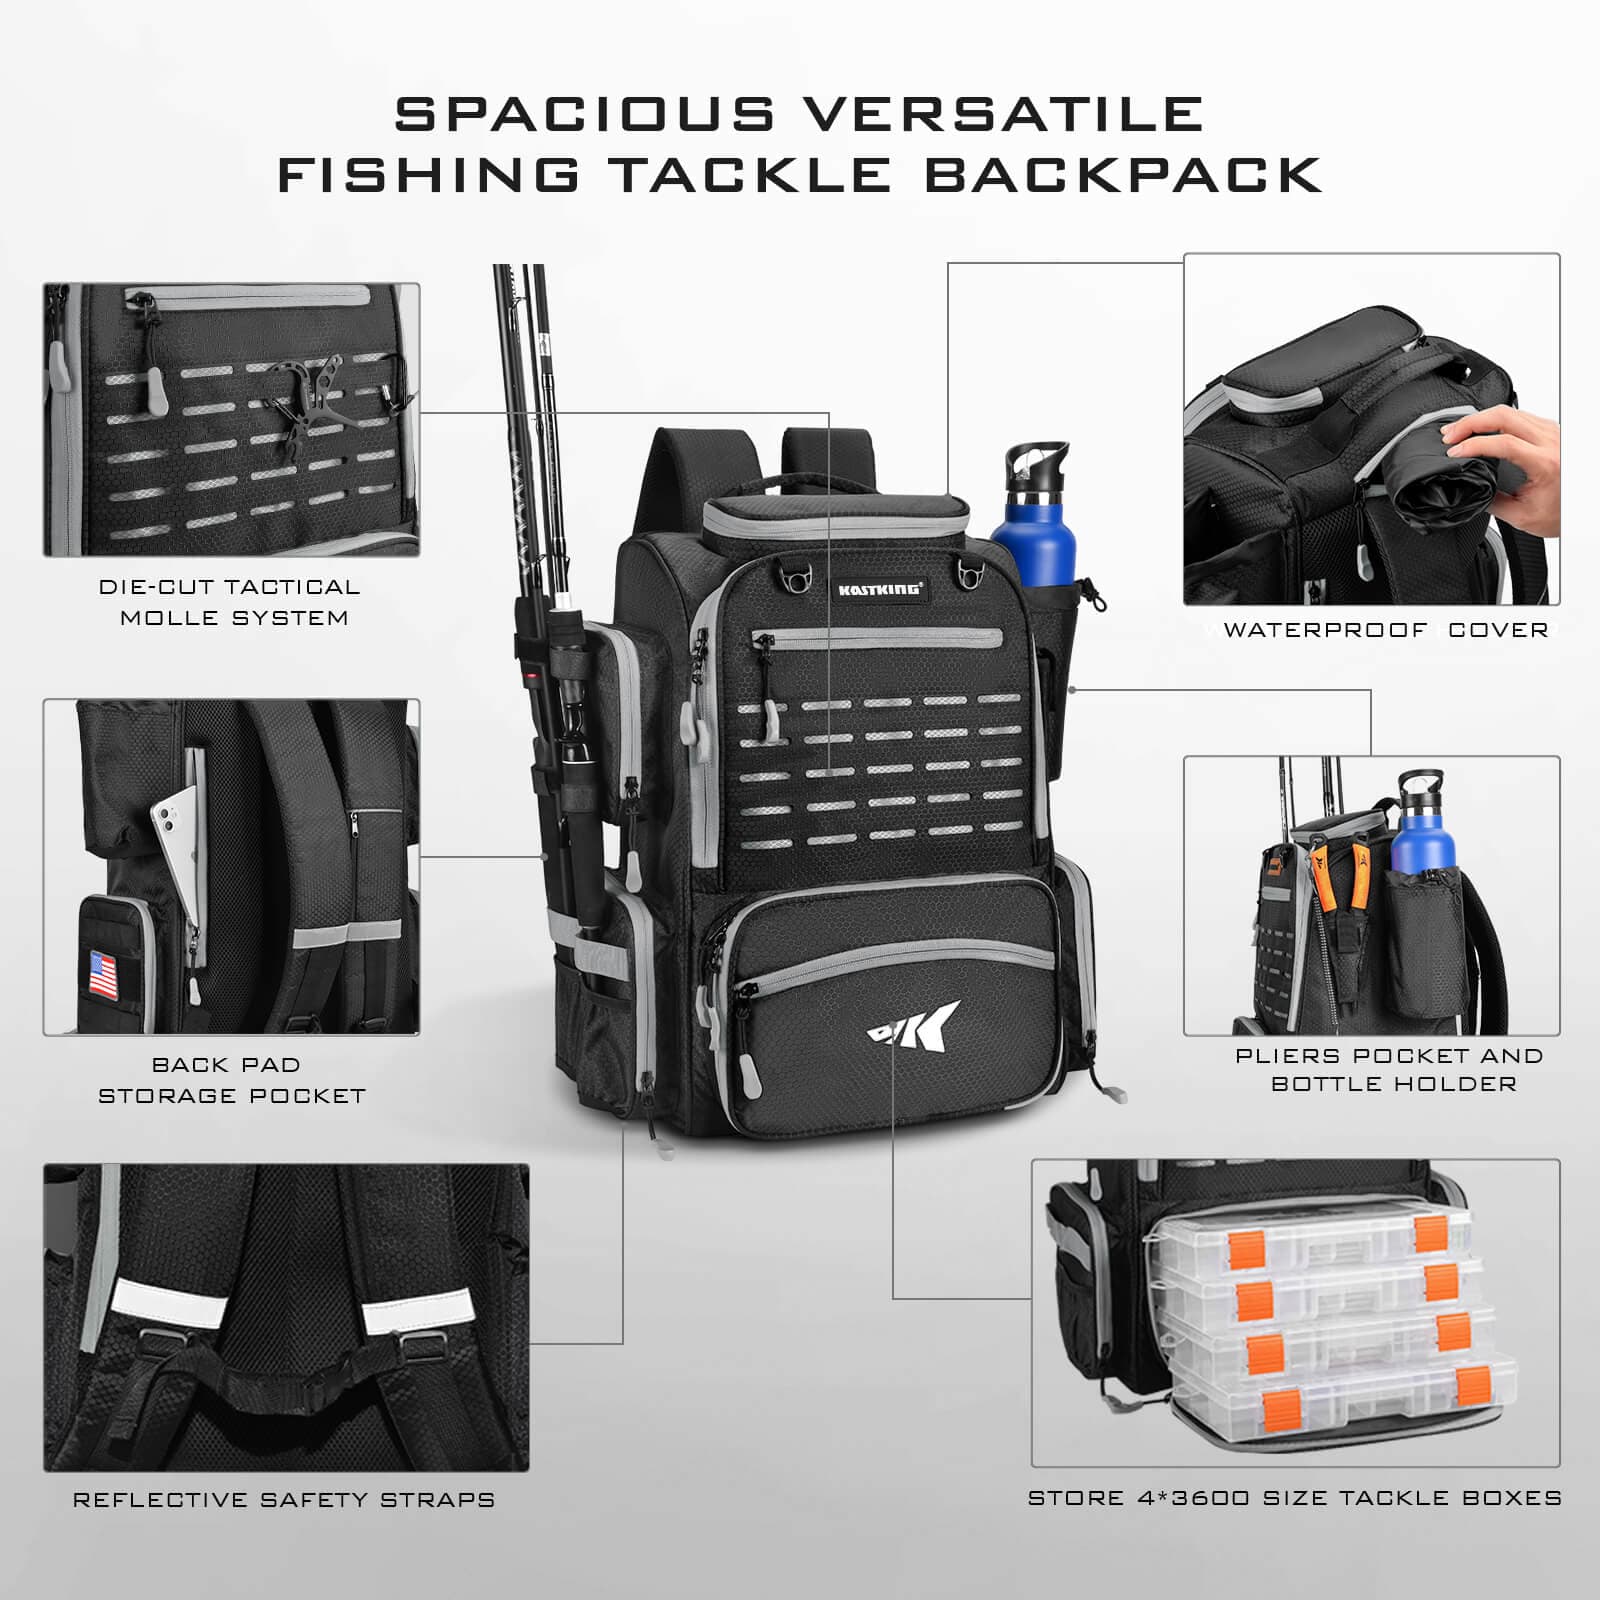 Fishing Backpack with Storage Bag for Fishing Gear